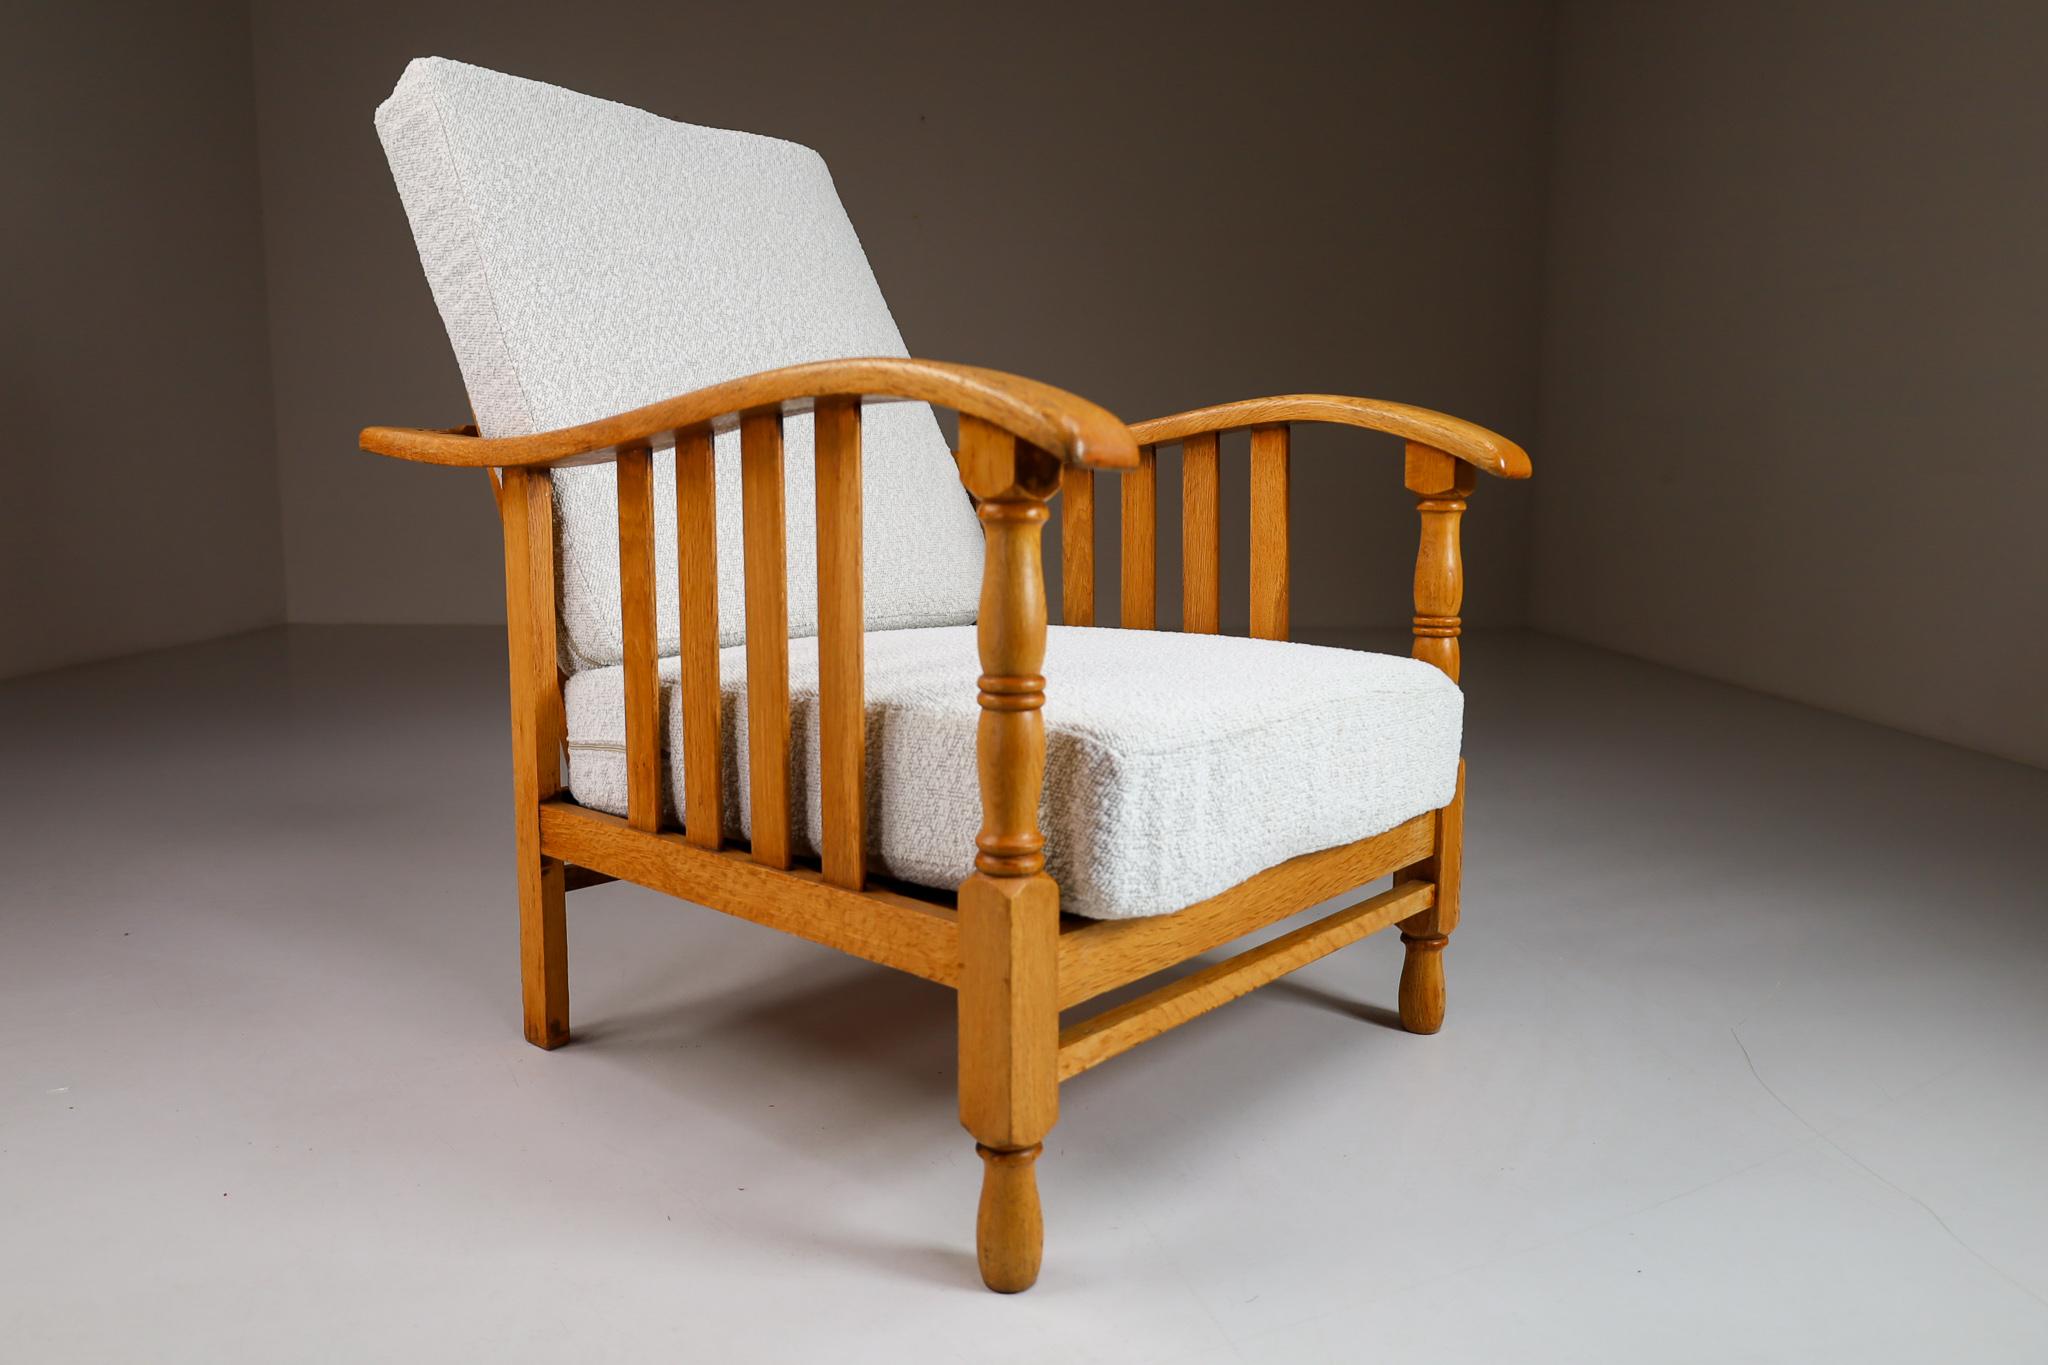 French Mid-century Armchair in Oak and Reupholstered Fabric, France 1950s For Sale